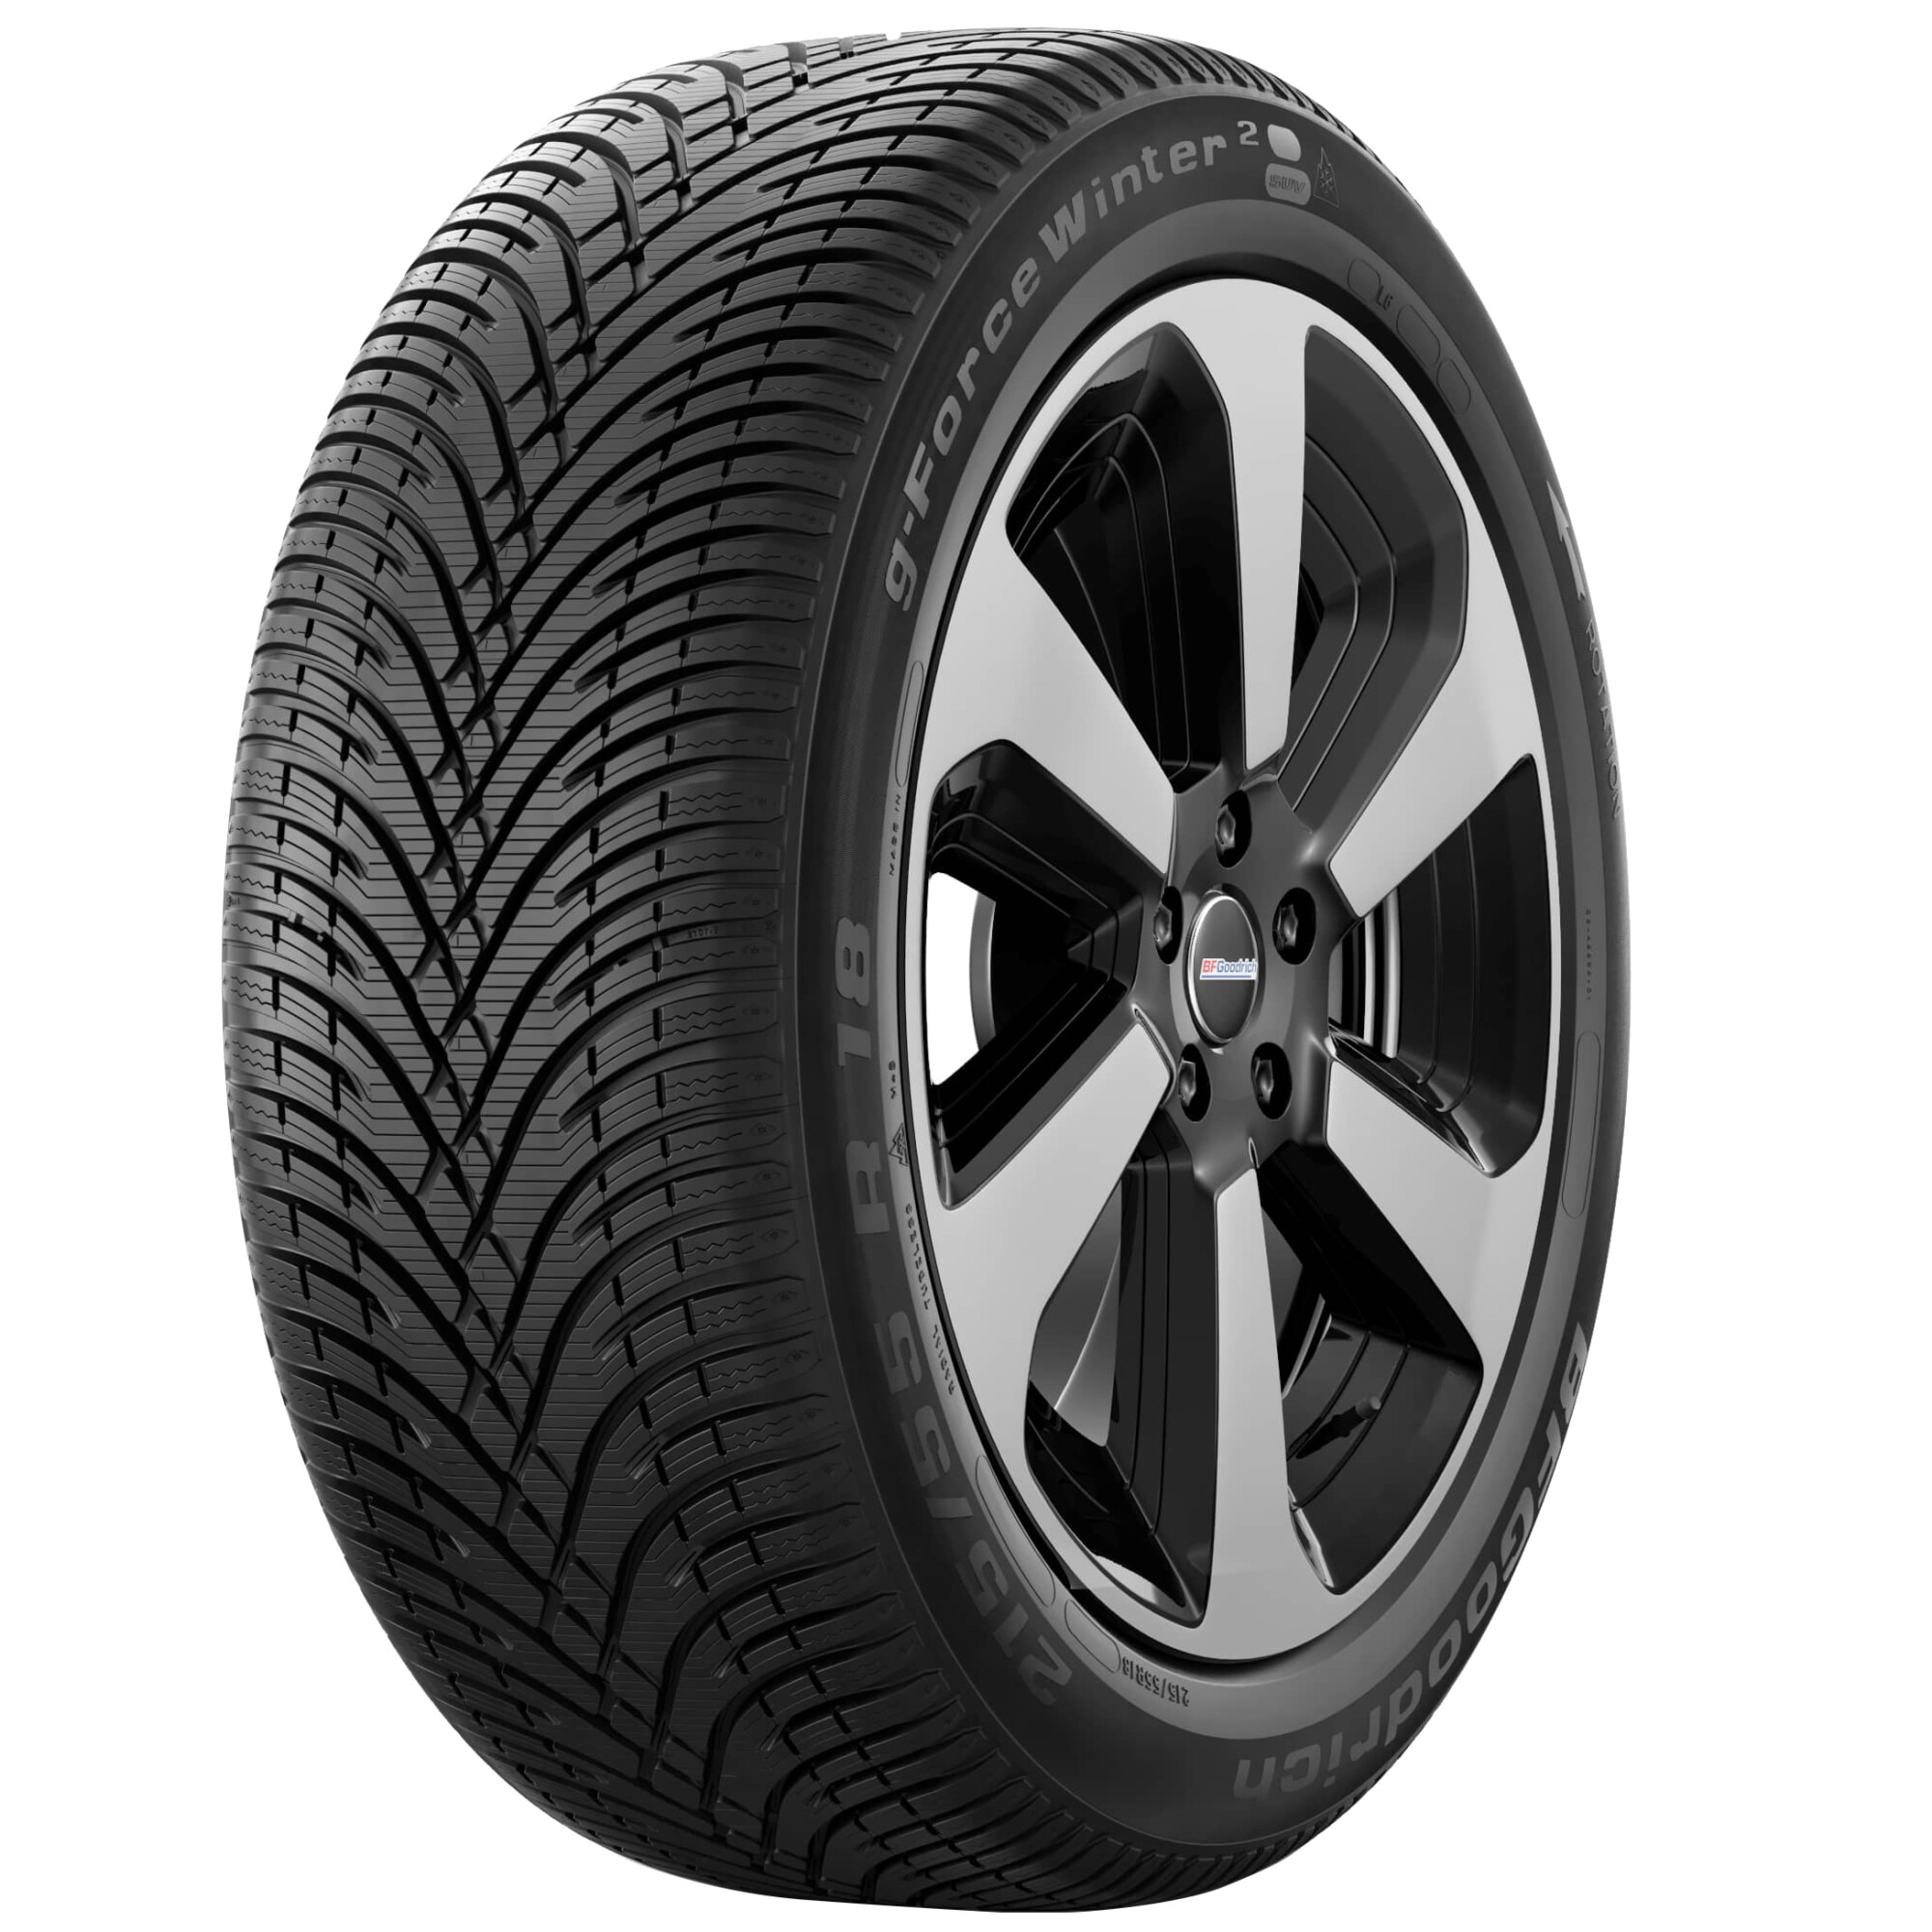 the same Imminent Lubricate Anvelopa de iarna Bf Goodrich G-FORCE WINTER 2 SUV 215/60 R17 96H - eMAG.ro